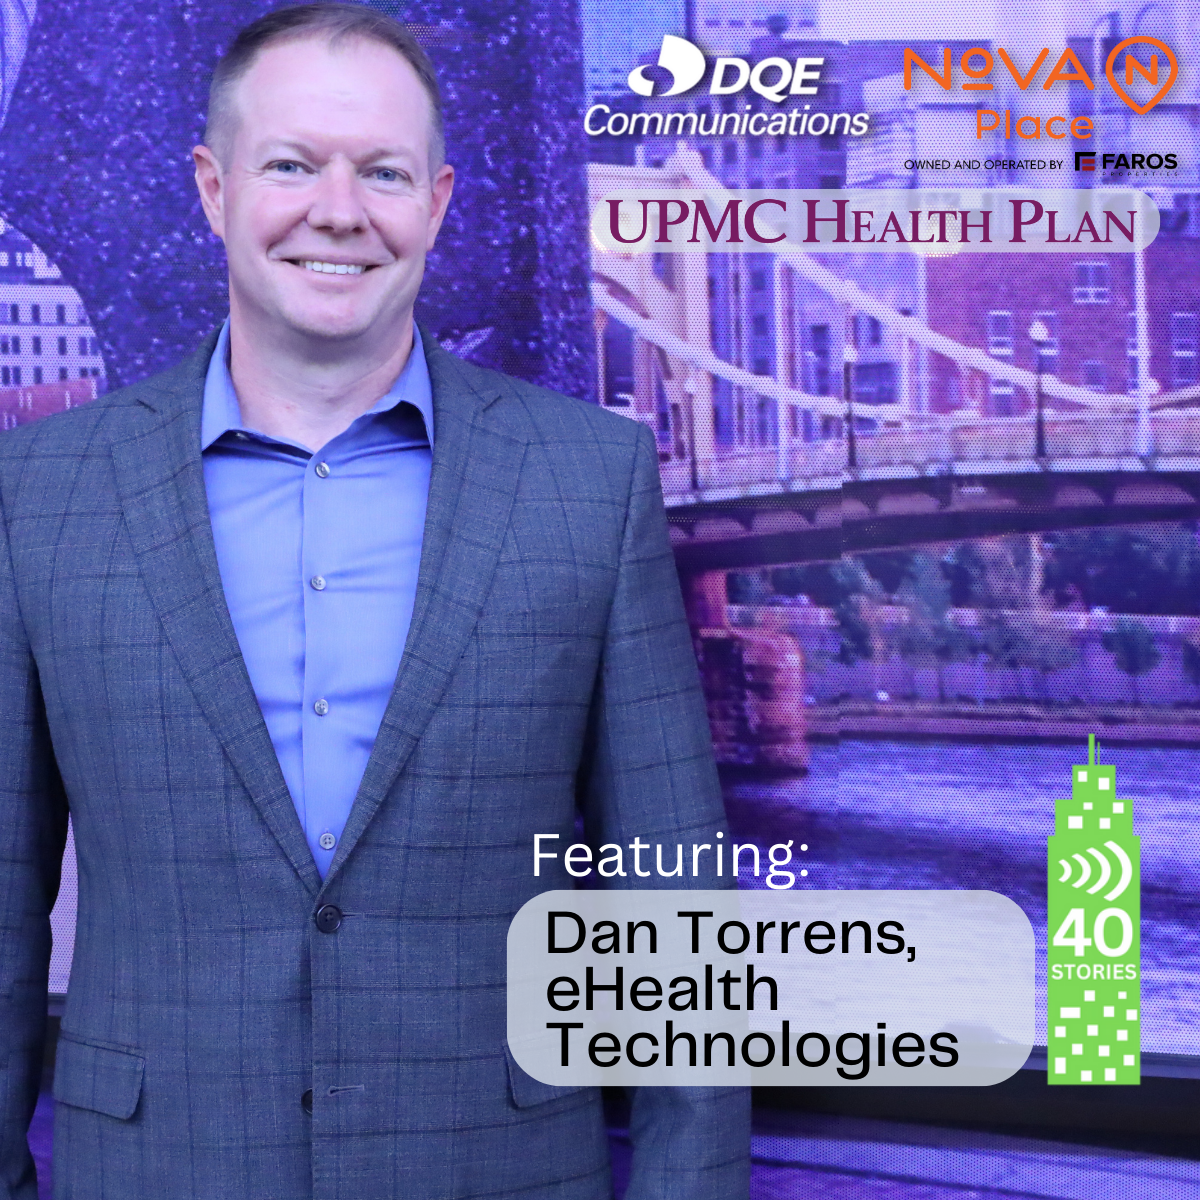 Dan Torrens of eHealth Technologies 40 Stories Pittsburgh Technology Council